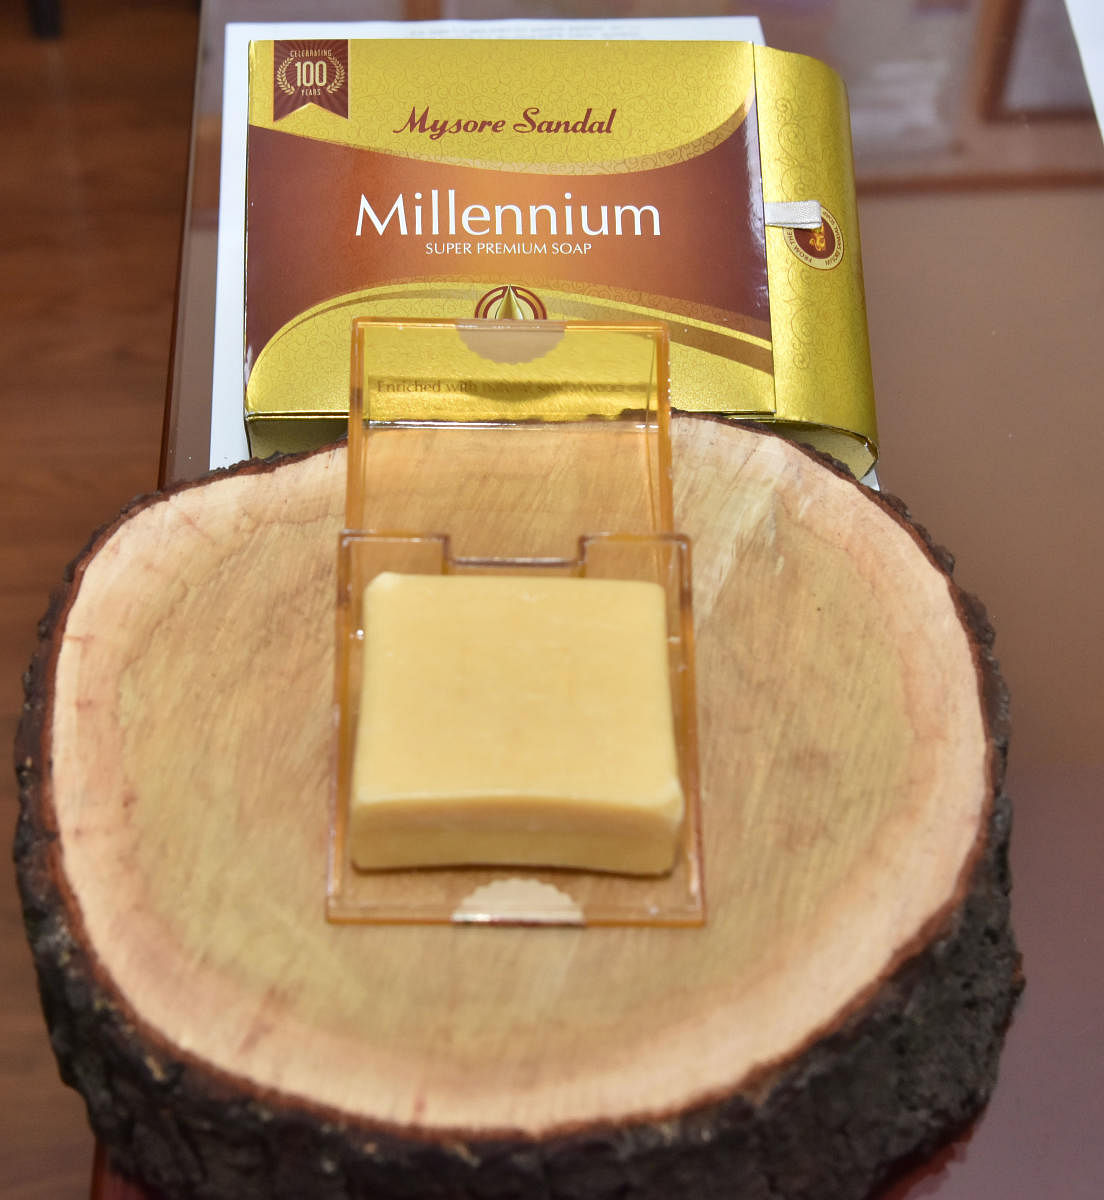 Present packaging of Mysore Sandal Millennium Soap (left) and proposed design (right). DH Photo by Janardhan B K